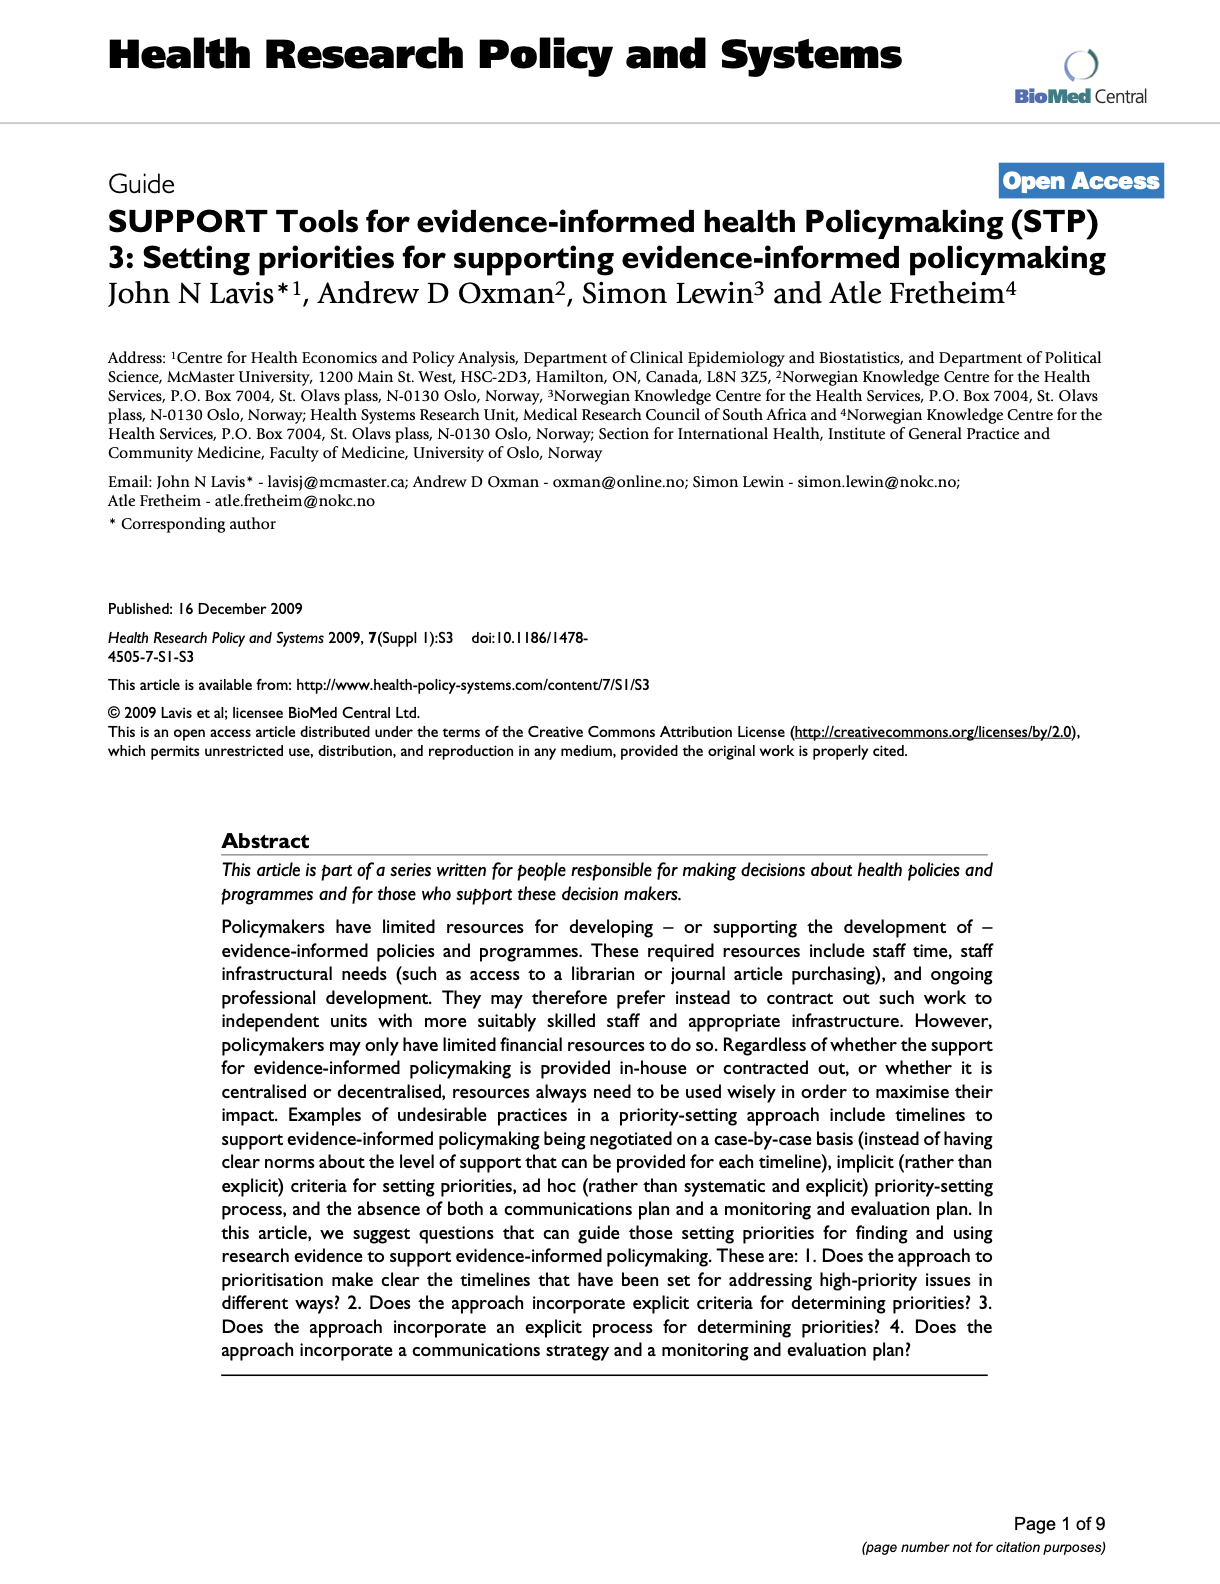 SUPPORT Tools for Evidence-Informed Health Policymaking (STP) 3: Setting Priorities for Supporting Evidence-informed Policymaking